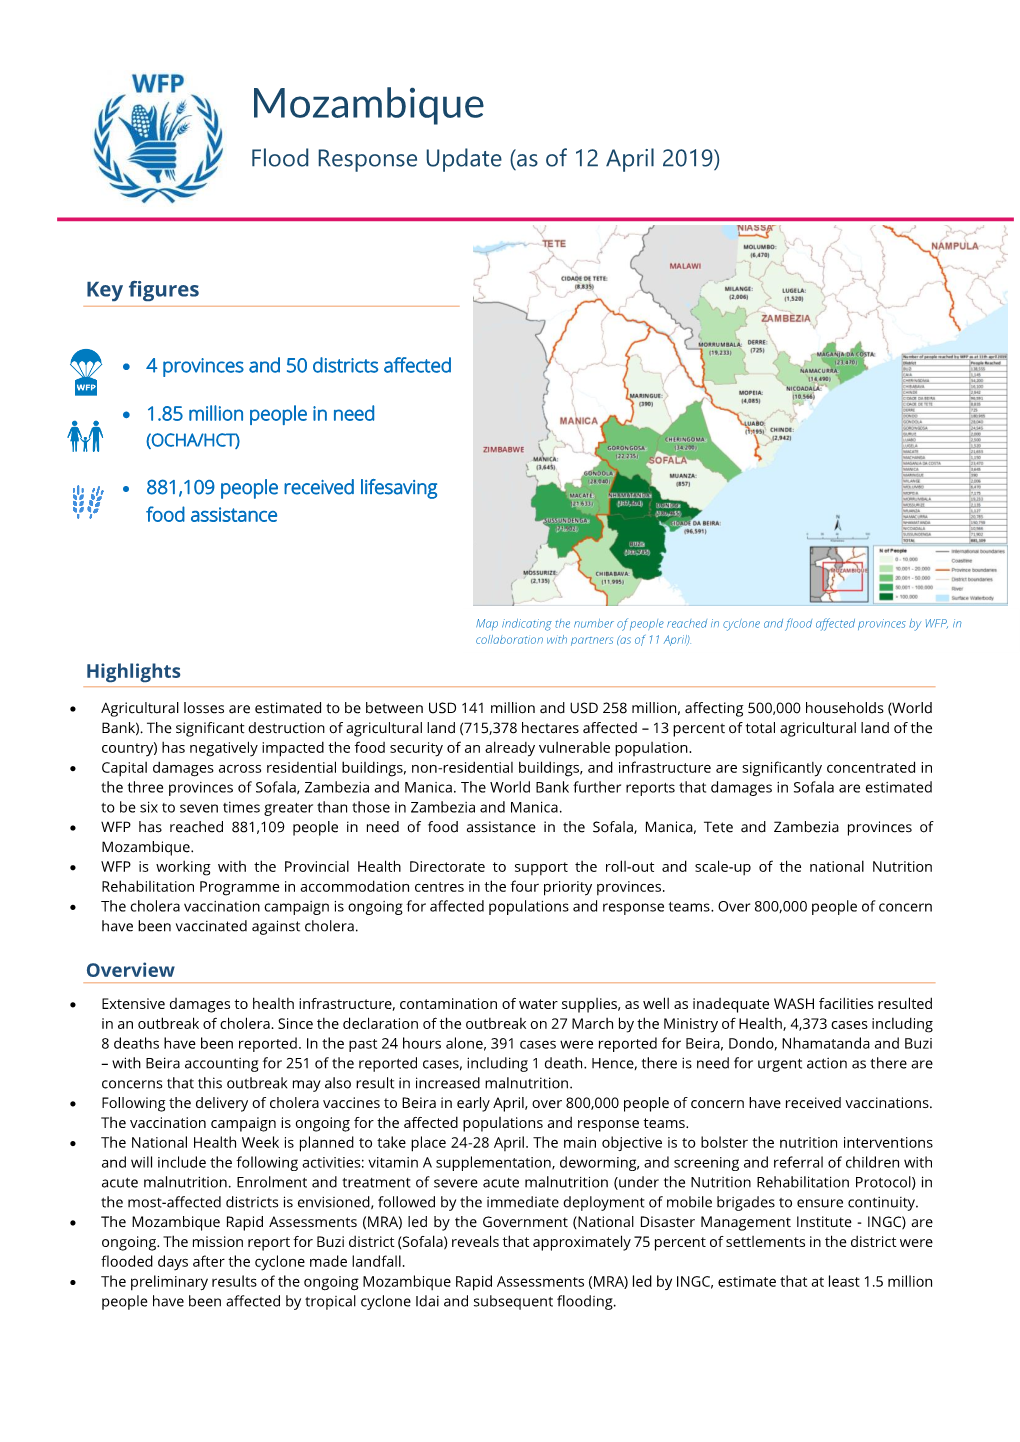 Mozambique Flood Response Update (As of 12 April 2019)